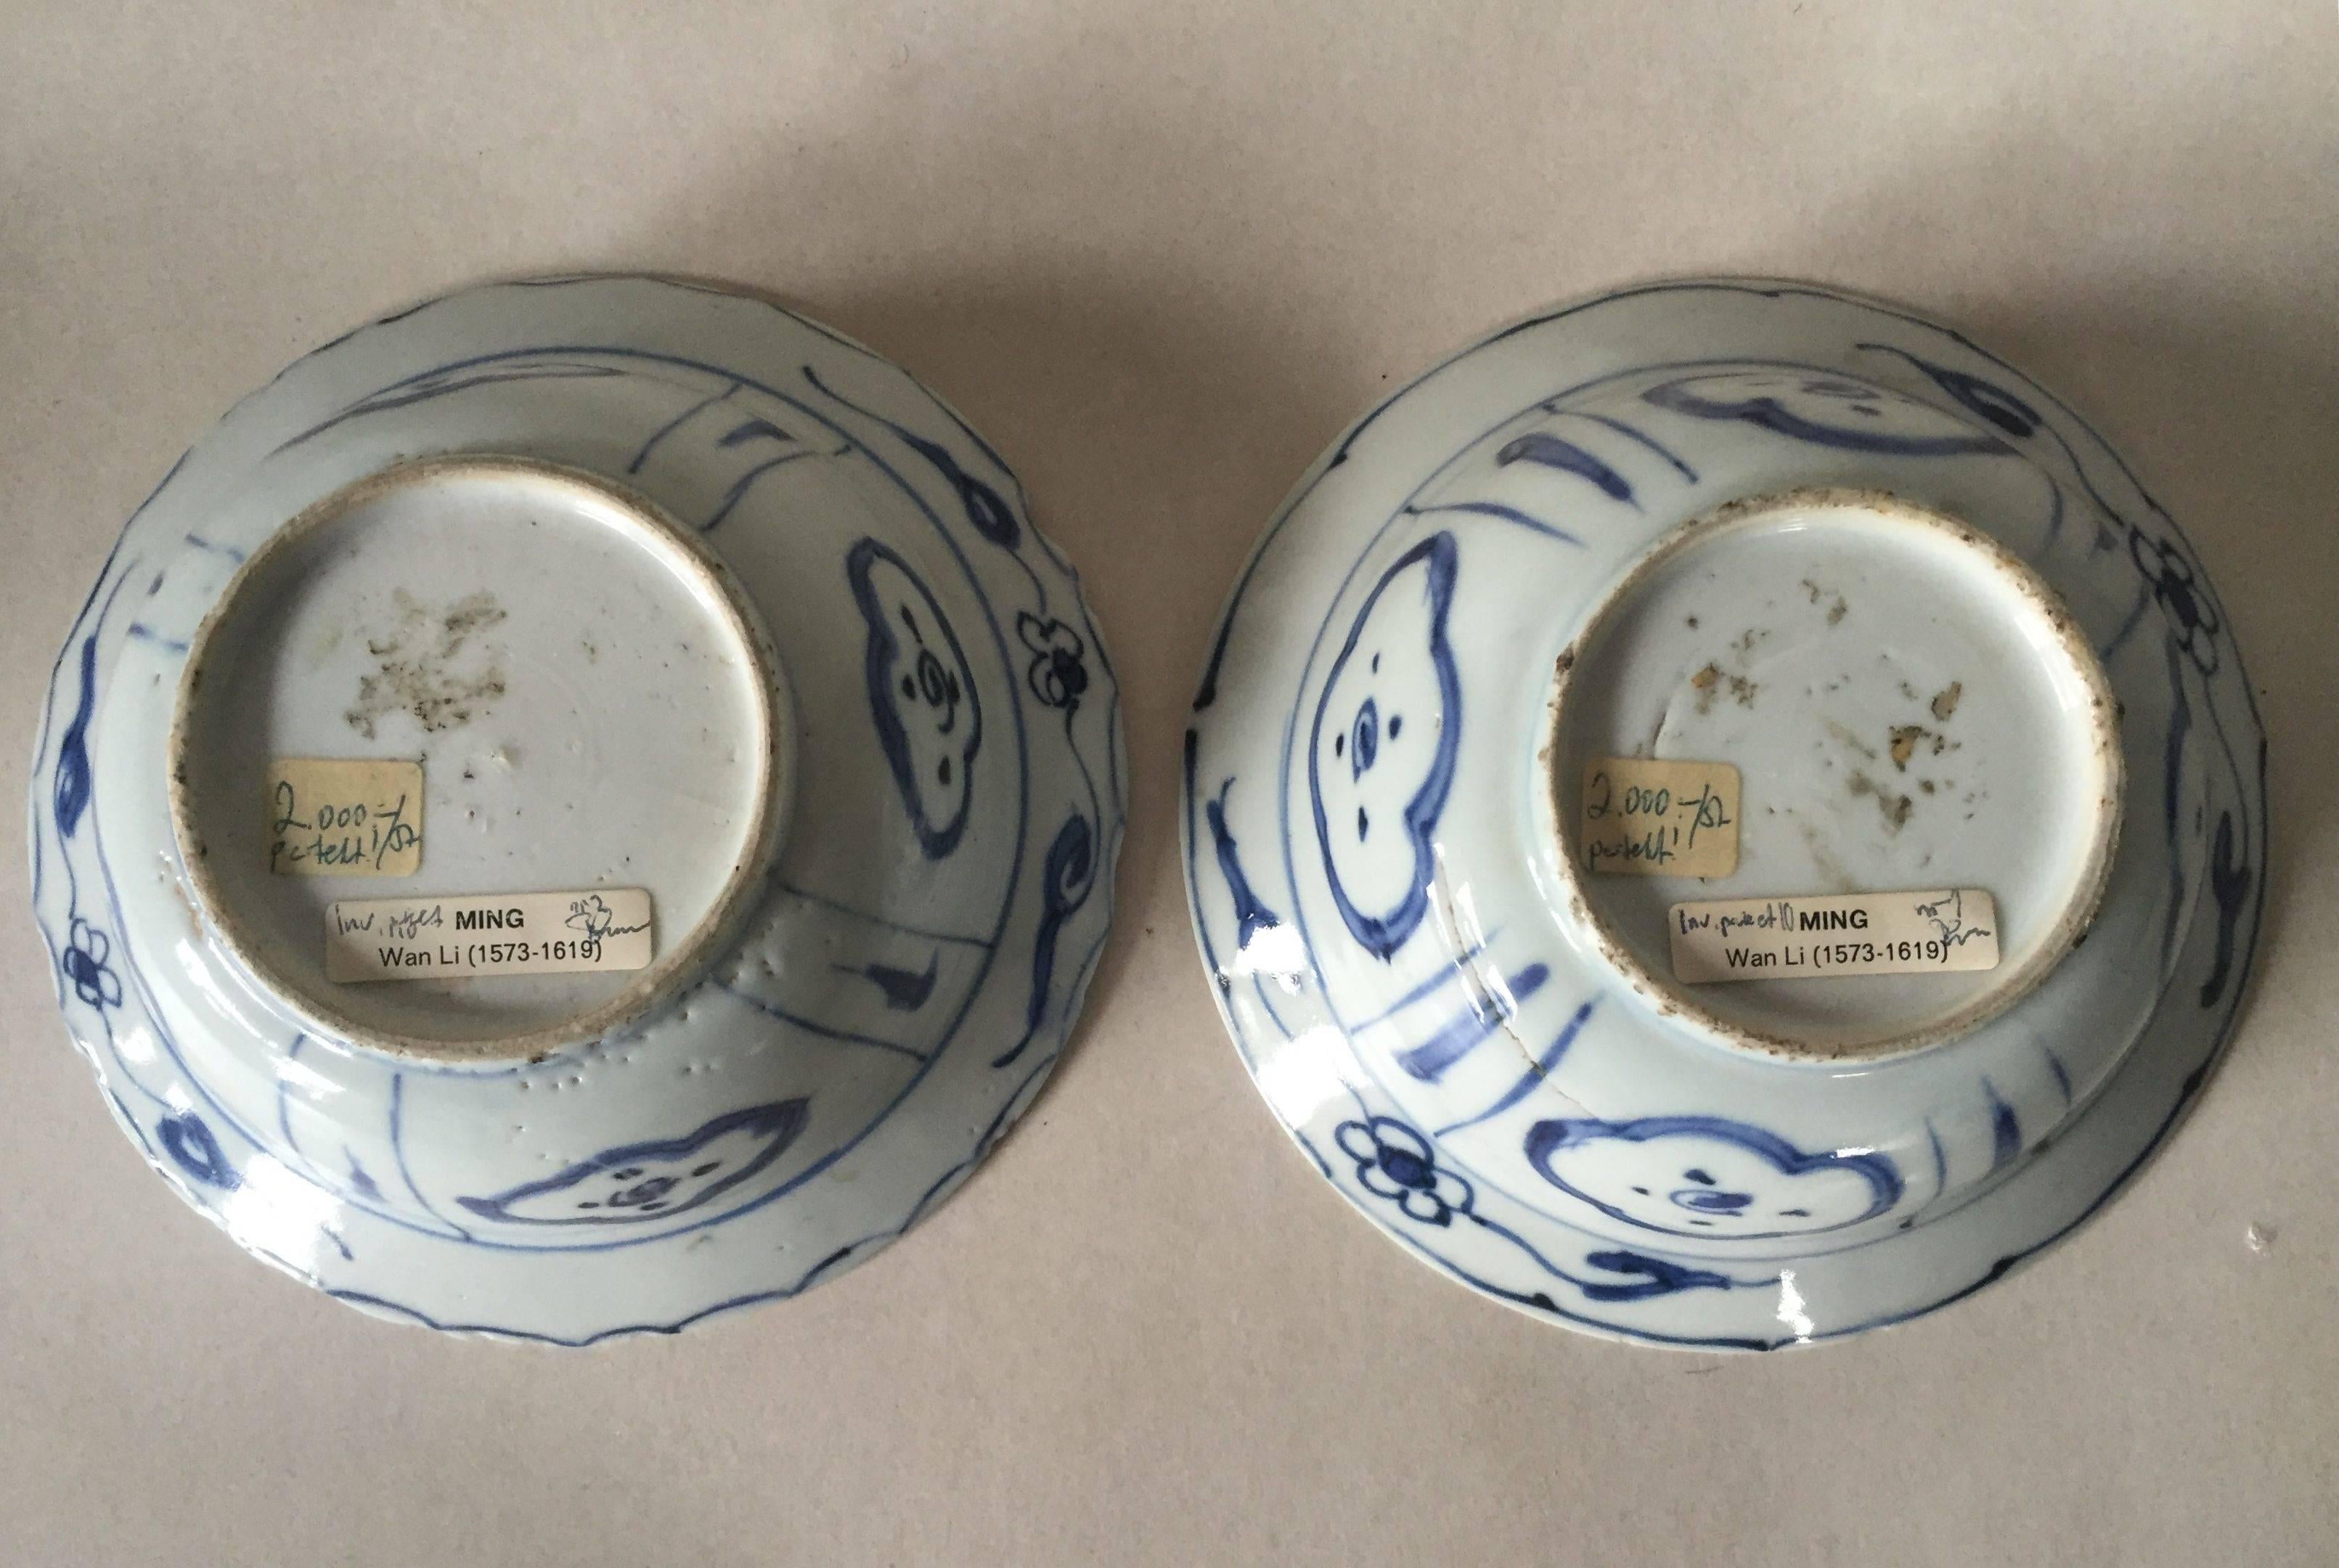 Wanli, 1579-1619 Chinese Klapmuts bowls or Kraak bowls. This is a very beautiful pair in excellent condition without any chips cracks or restorations. There are some firing defects in the glaze, like glazecracks and minor frits to the base.